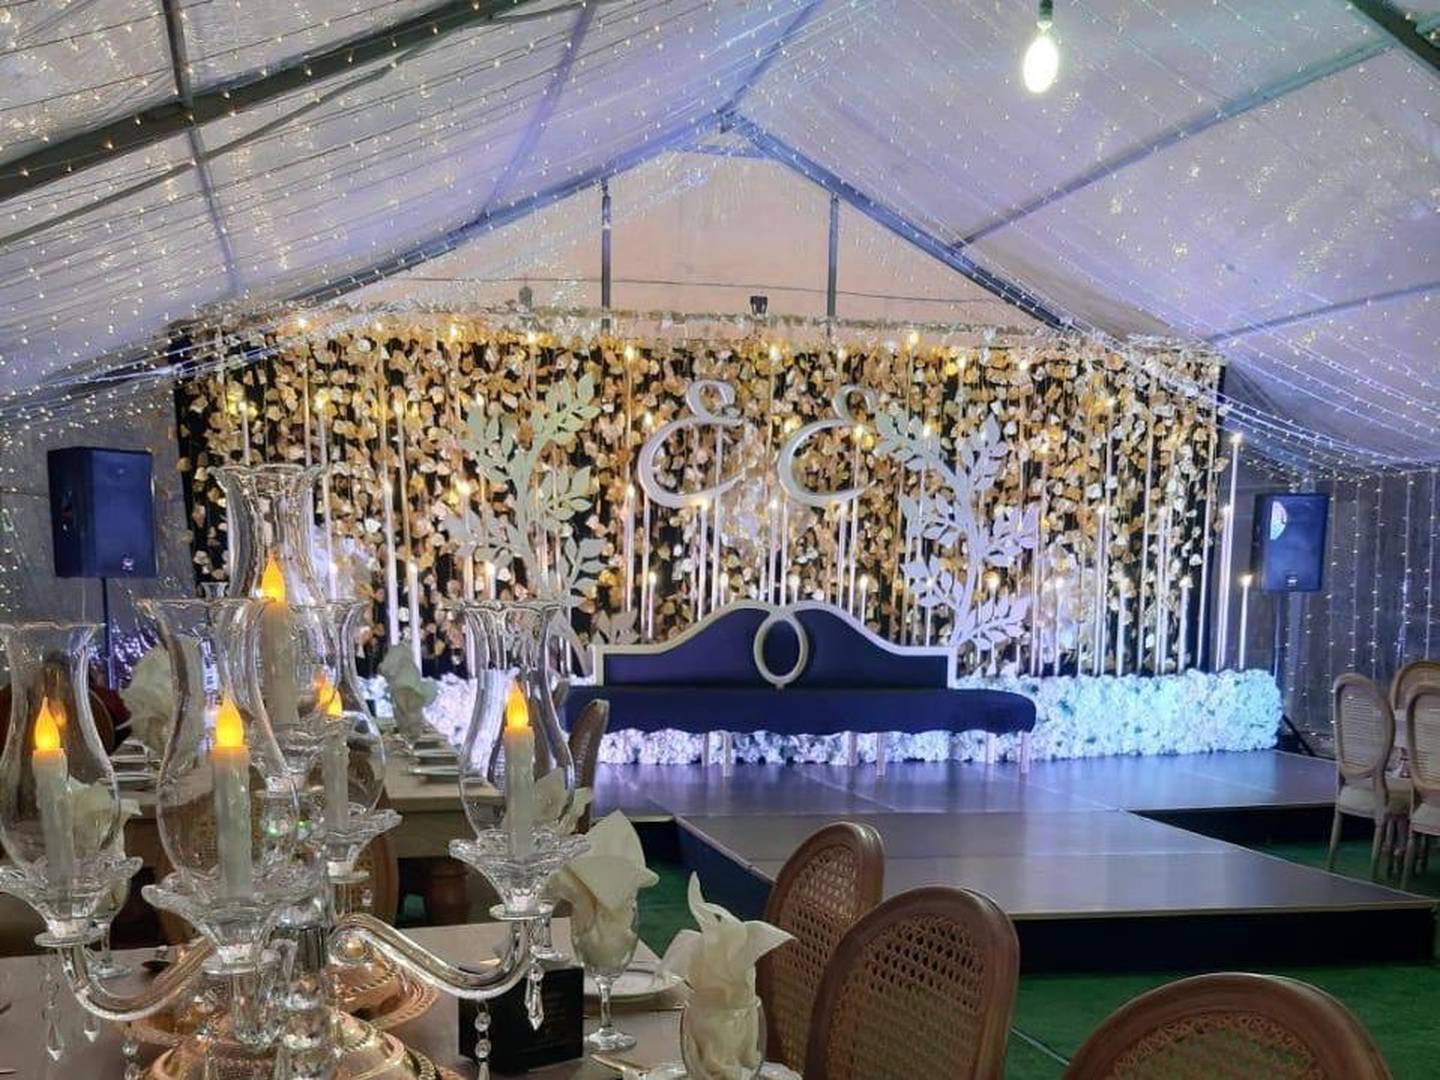 Police found this wedding marquee set up outside a villa in Abu Dhabi last week. Gatherings of more than 10 people are not allowed. Courtesy: Abu Dhabi Police